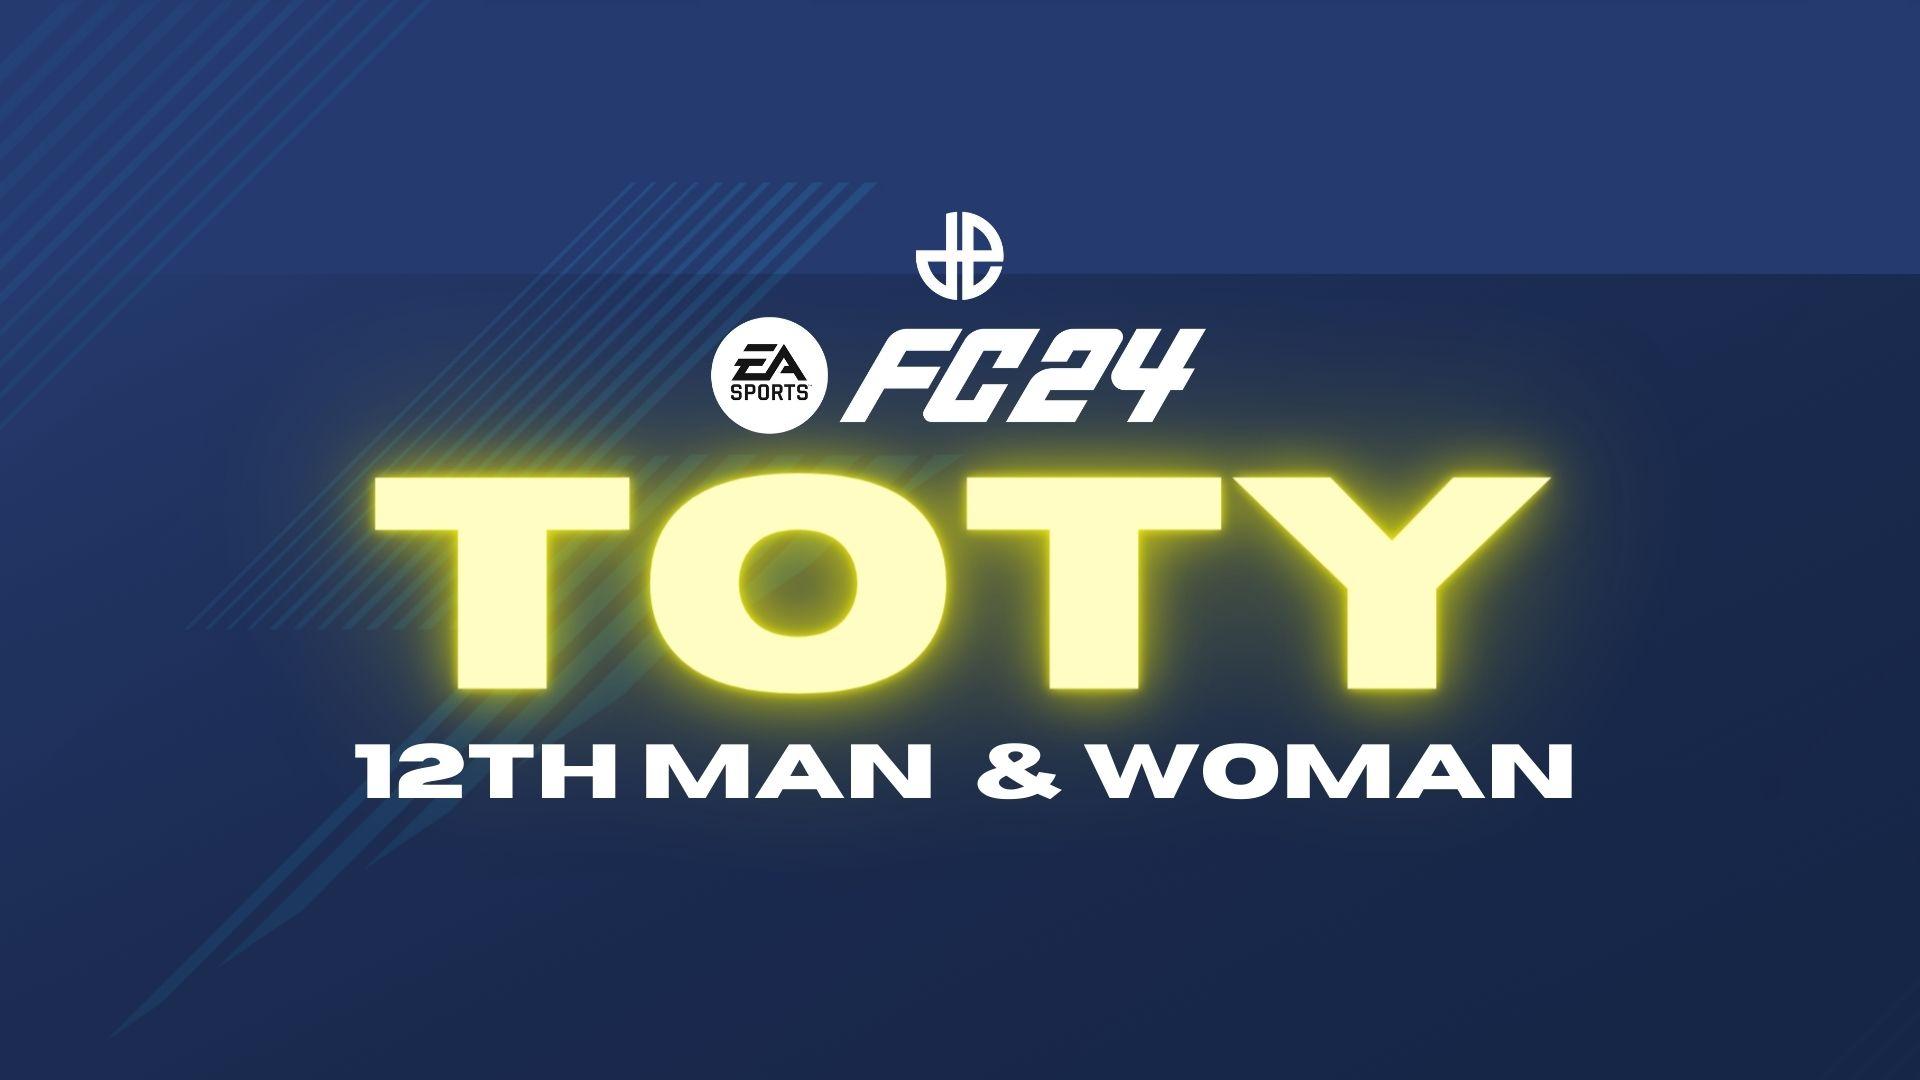 EA SPORTS FC TOTY logo with 12th man and woman text